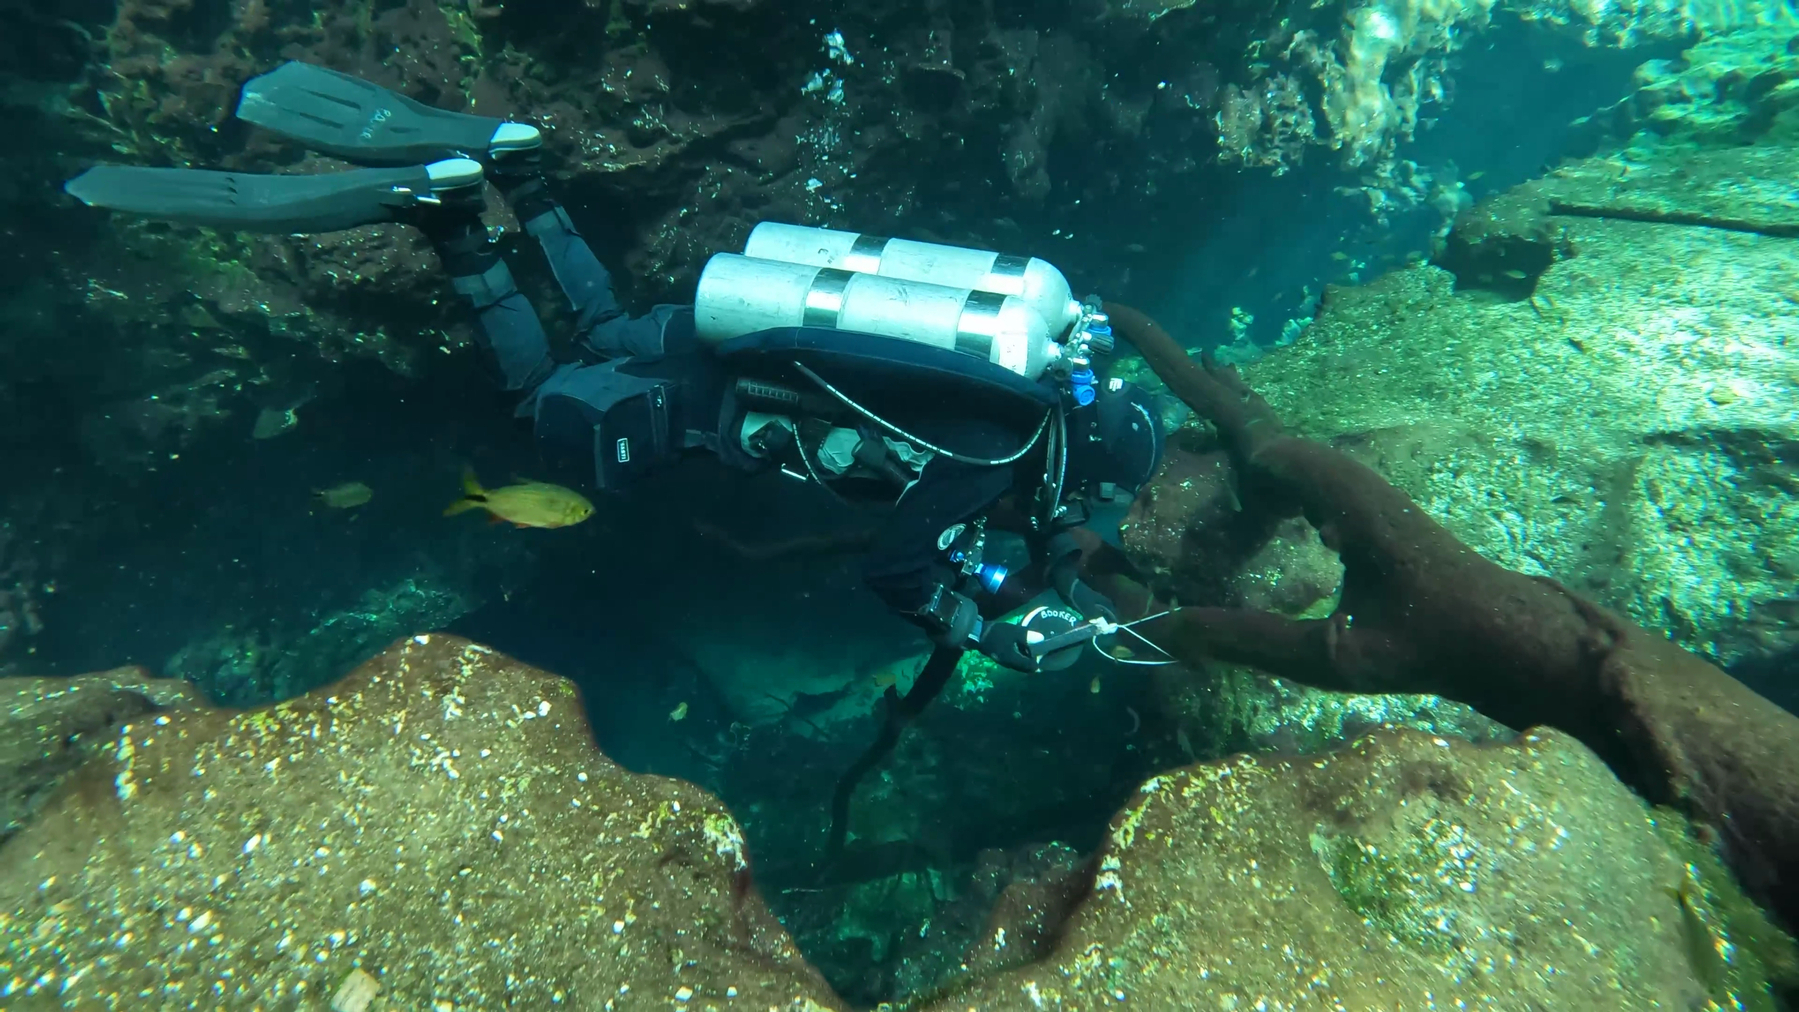 A diver hovering among the rocks leading into an underwater cave system, tying a guideline reel to a nearby fallen tree branch, the crystal clear water casting a green blue hue across the scene.